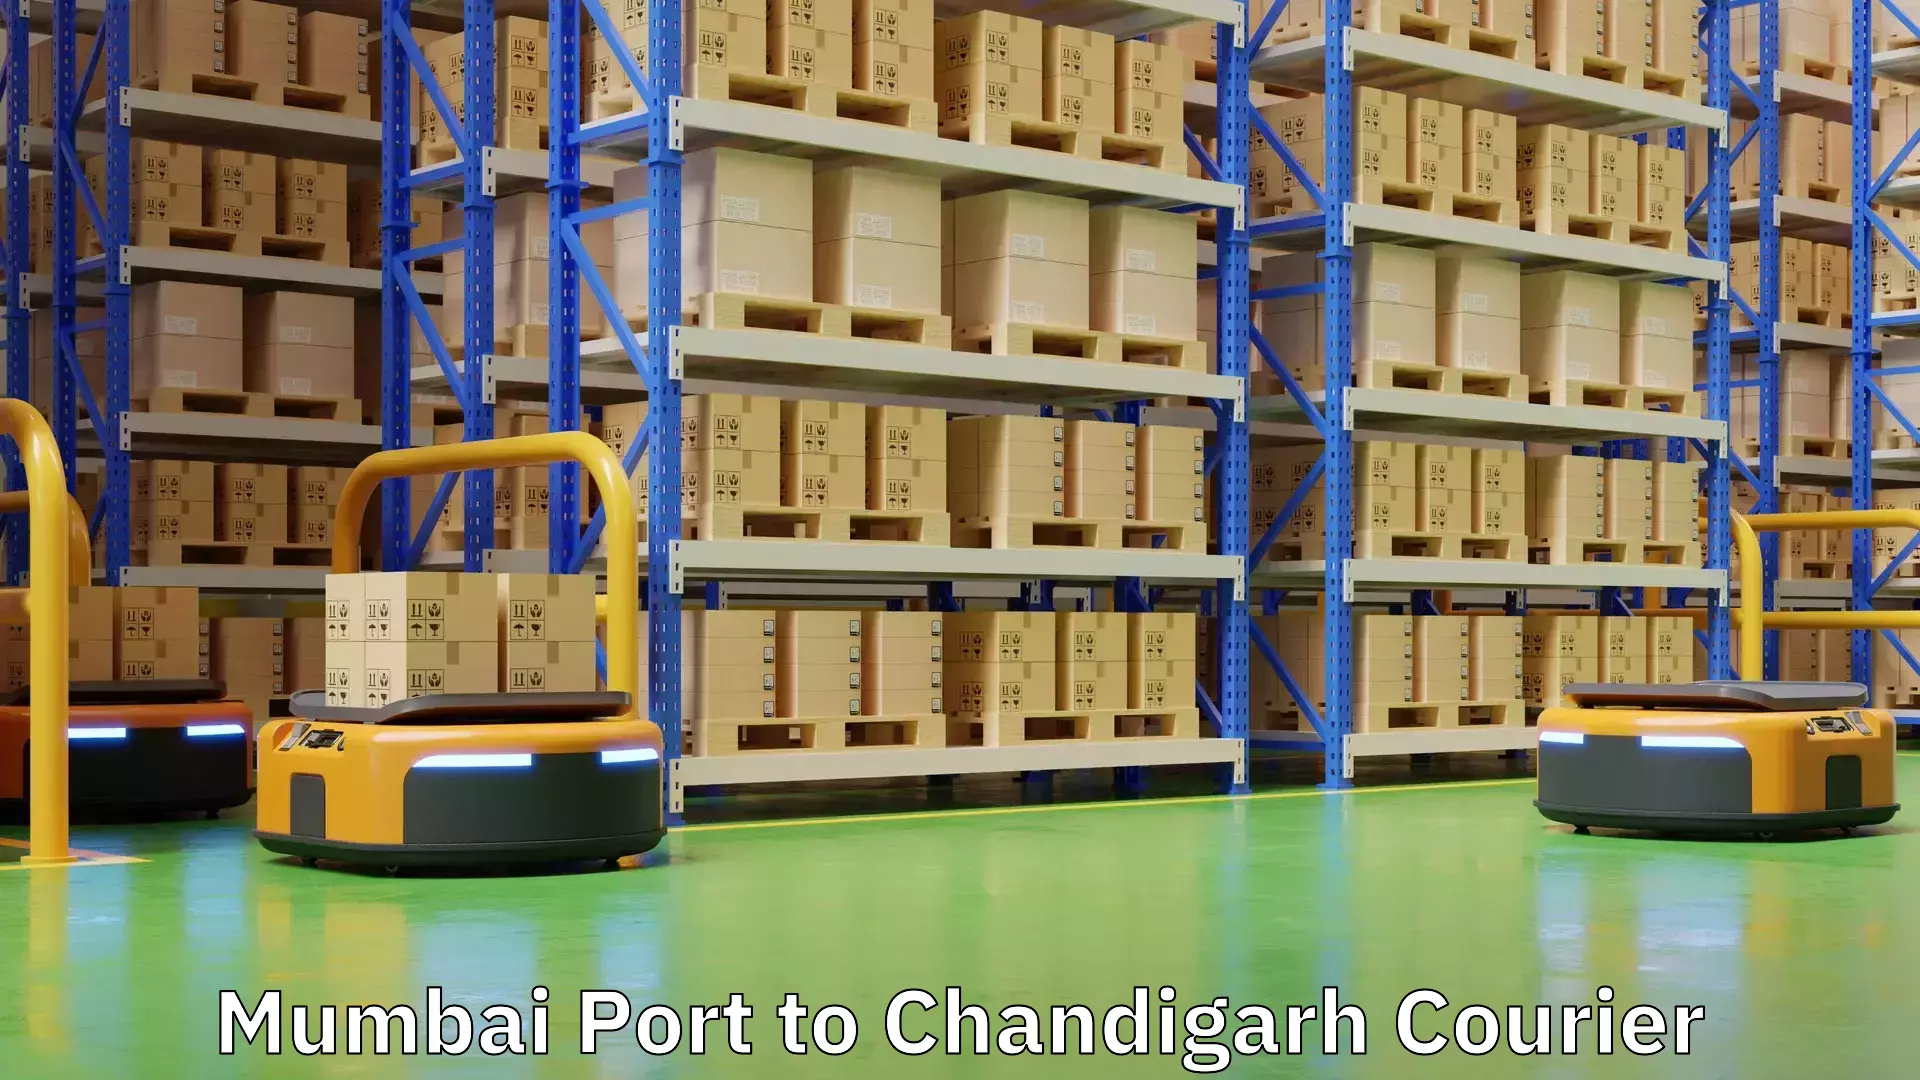 Professional courier services Mumbai Port to Chandigarh